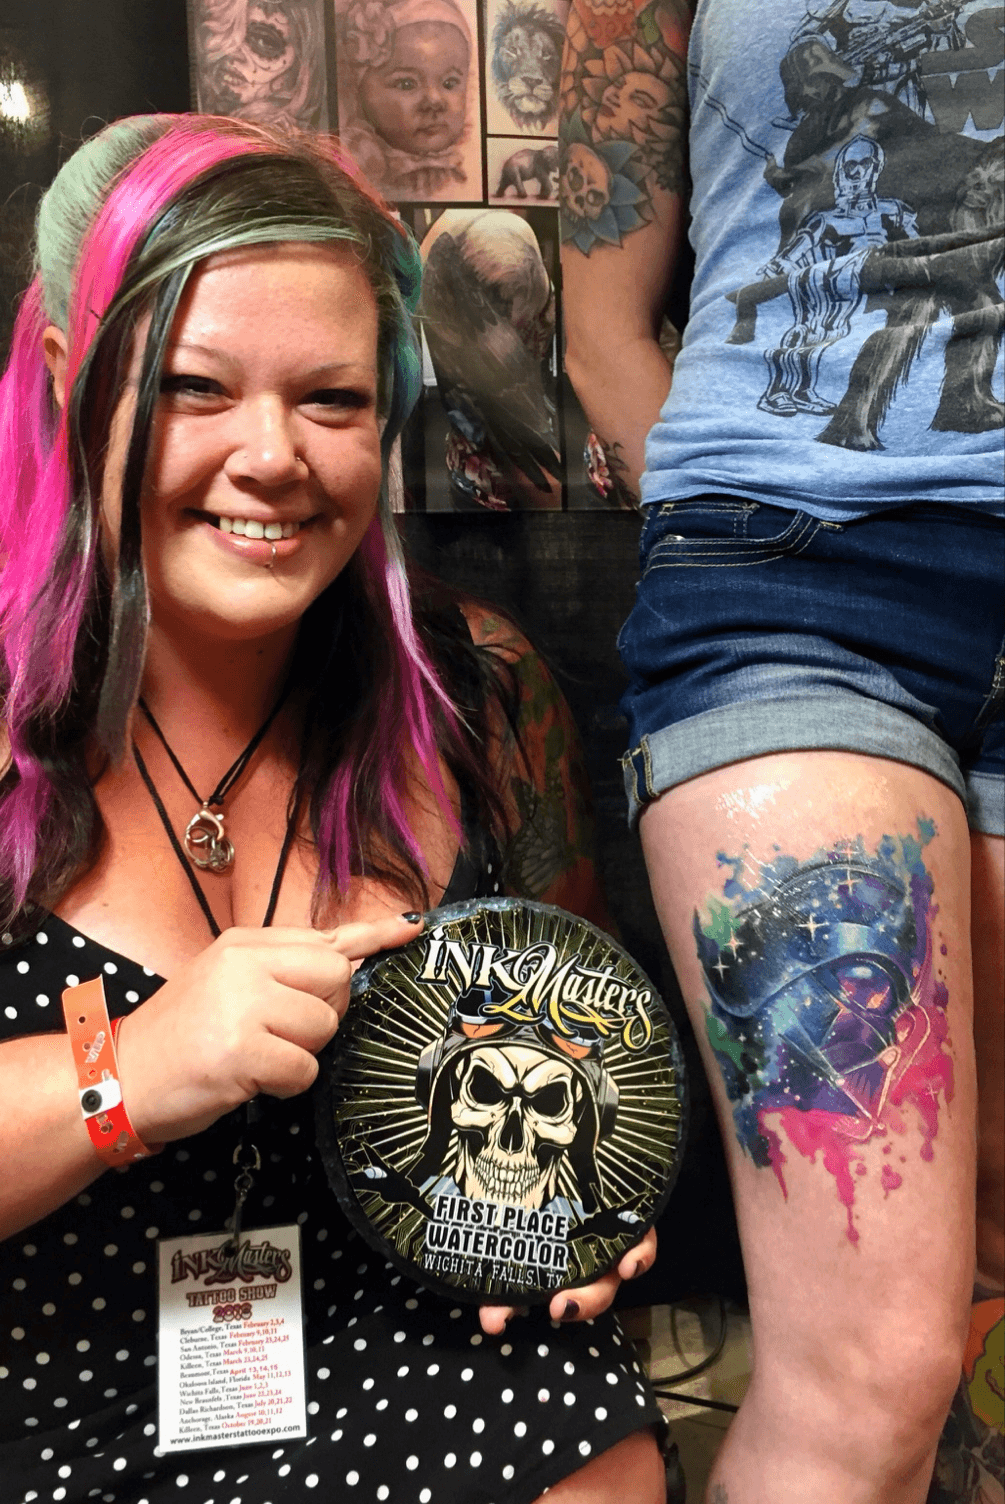 Sparks fly at the Tampa Tattoo Arts Convention  Local Arts  Tampa   Creative Loafing Tampa Bay